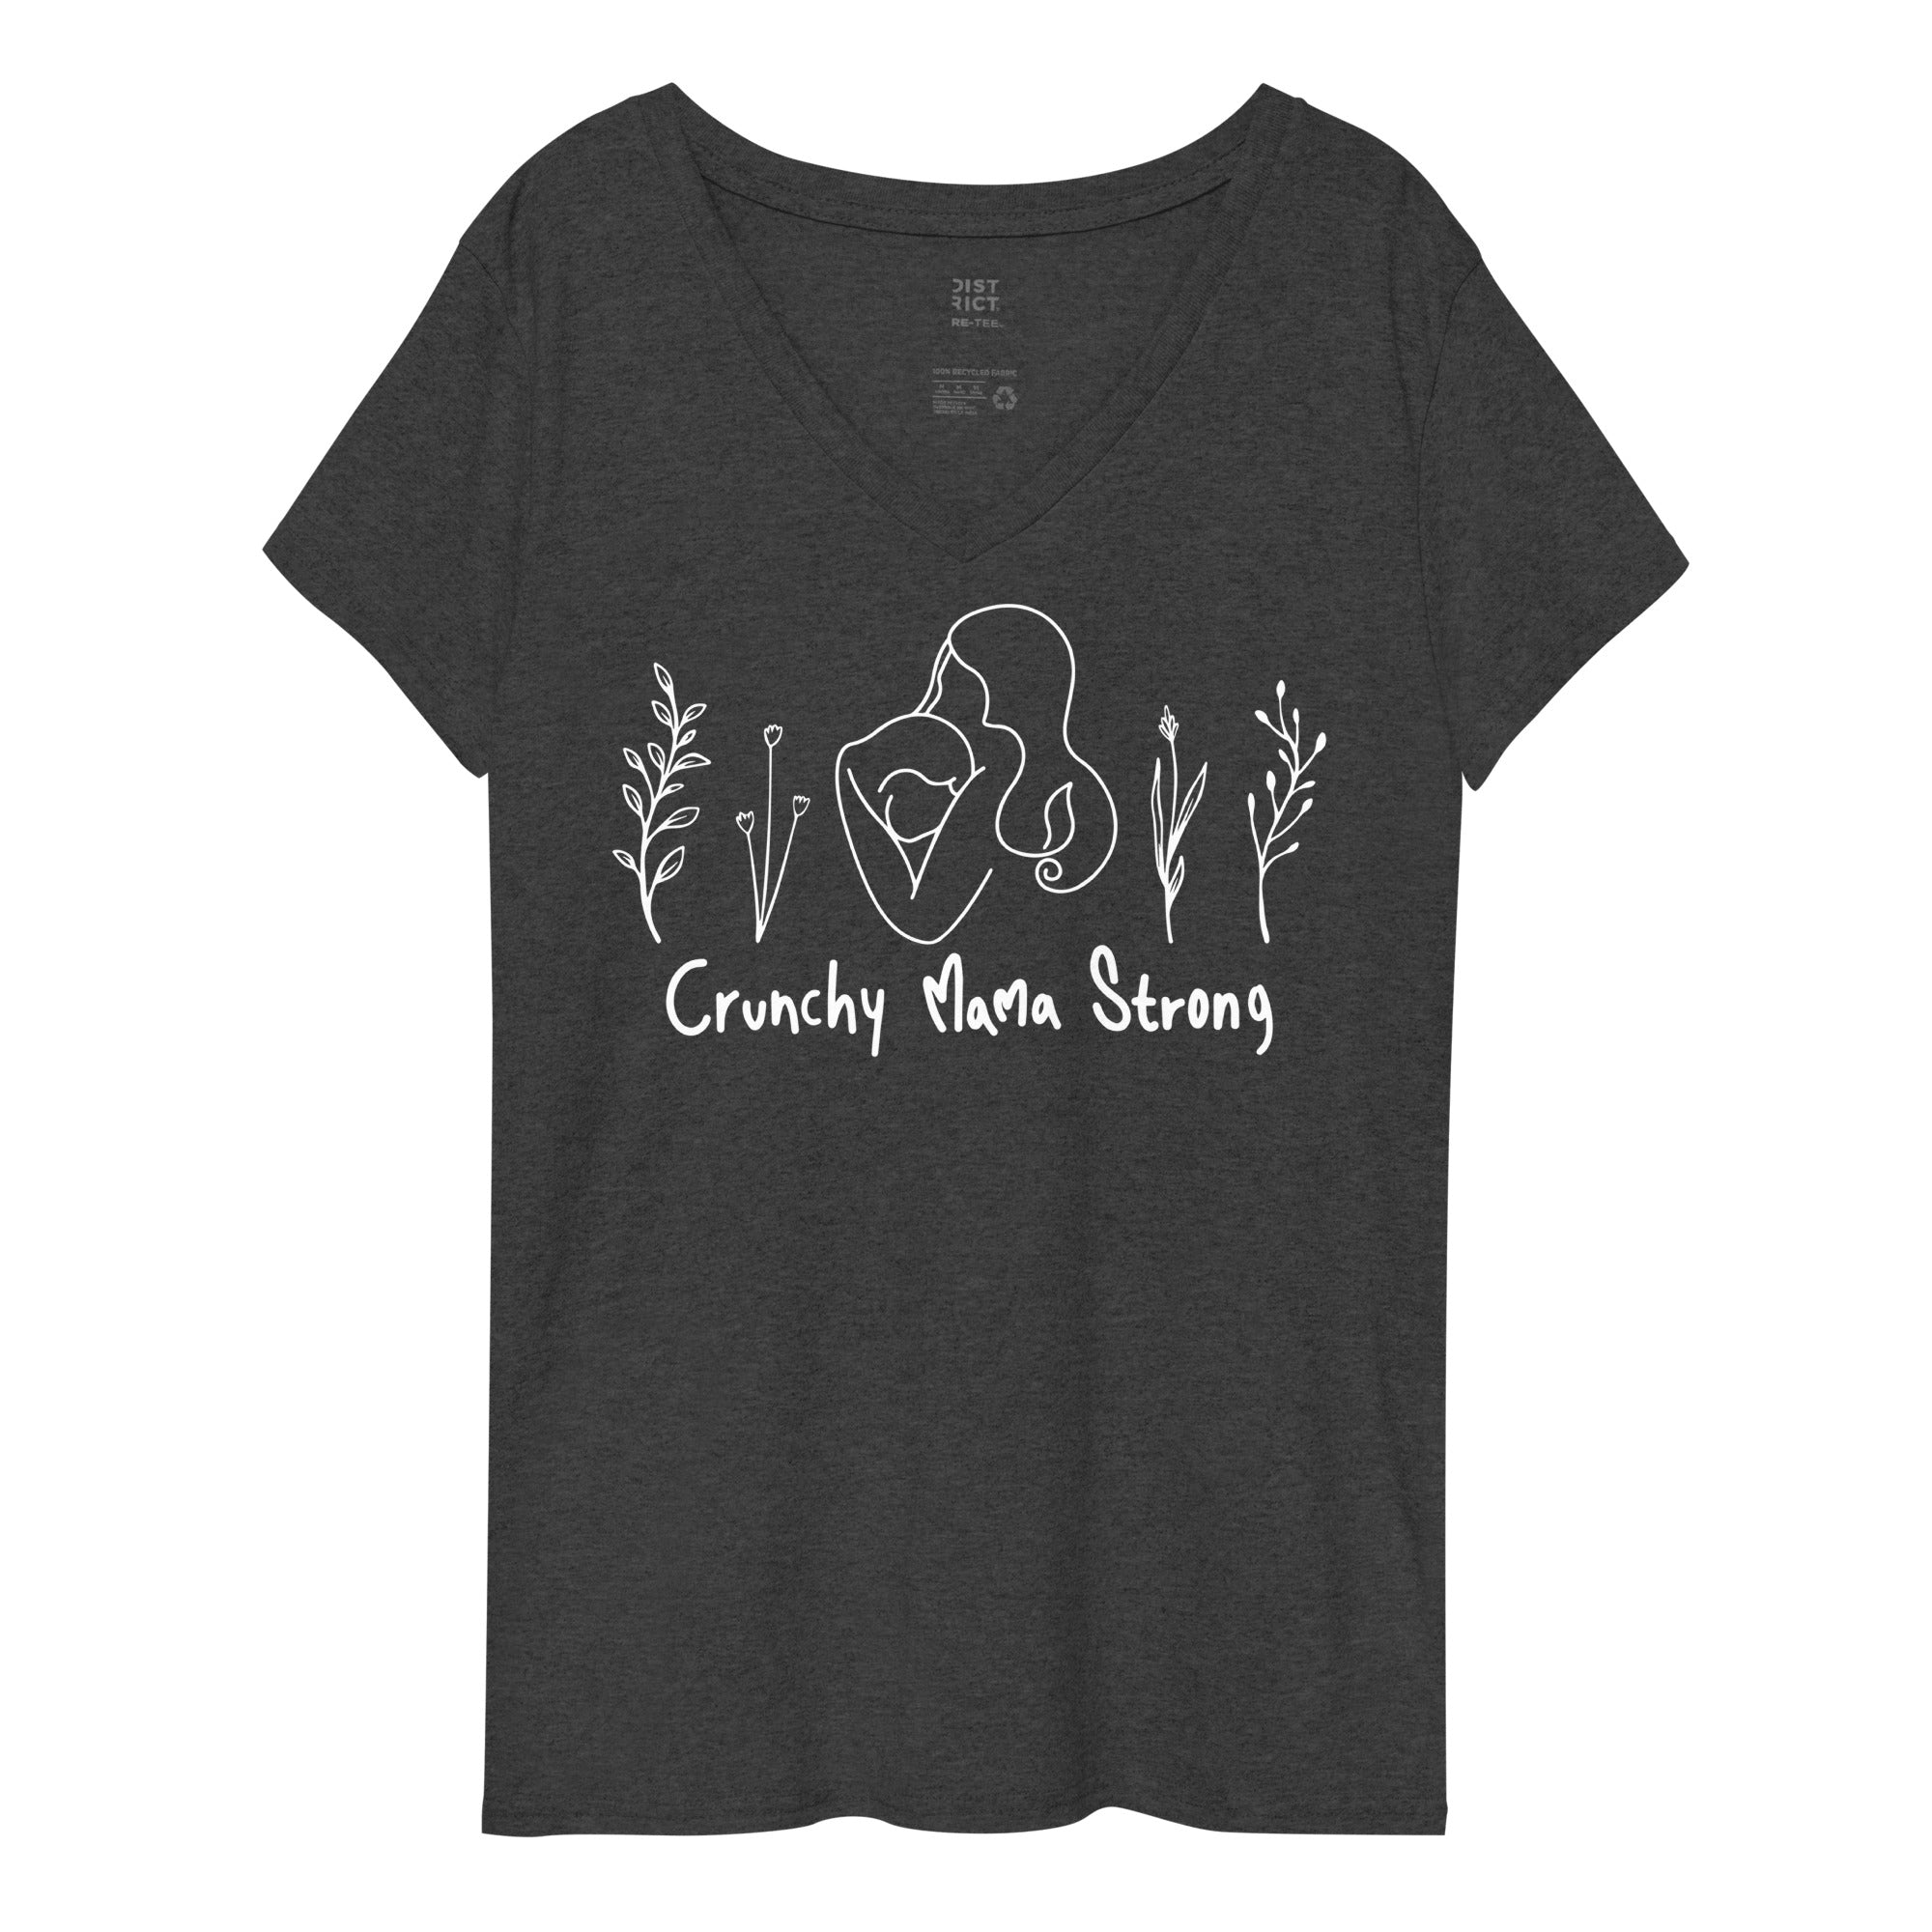 Crunchy Mama Strong Women’s Recycled V-neck t-shirt